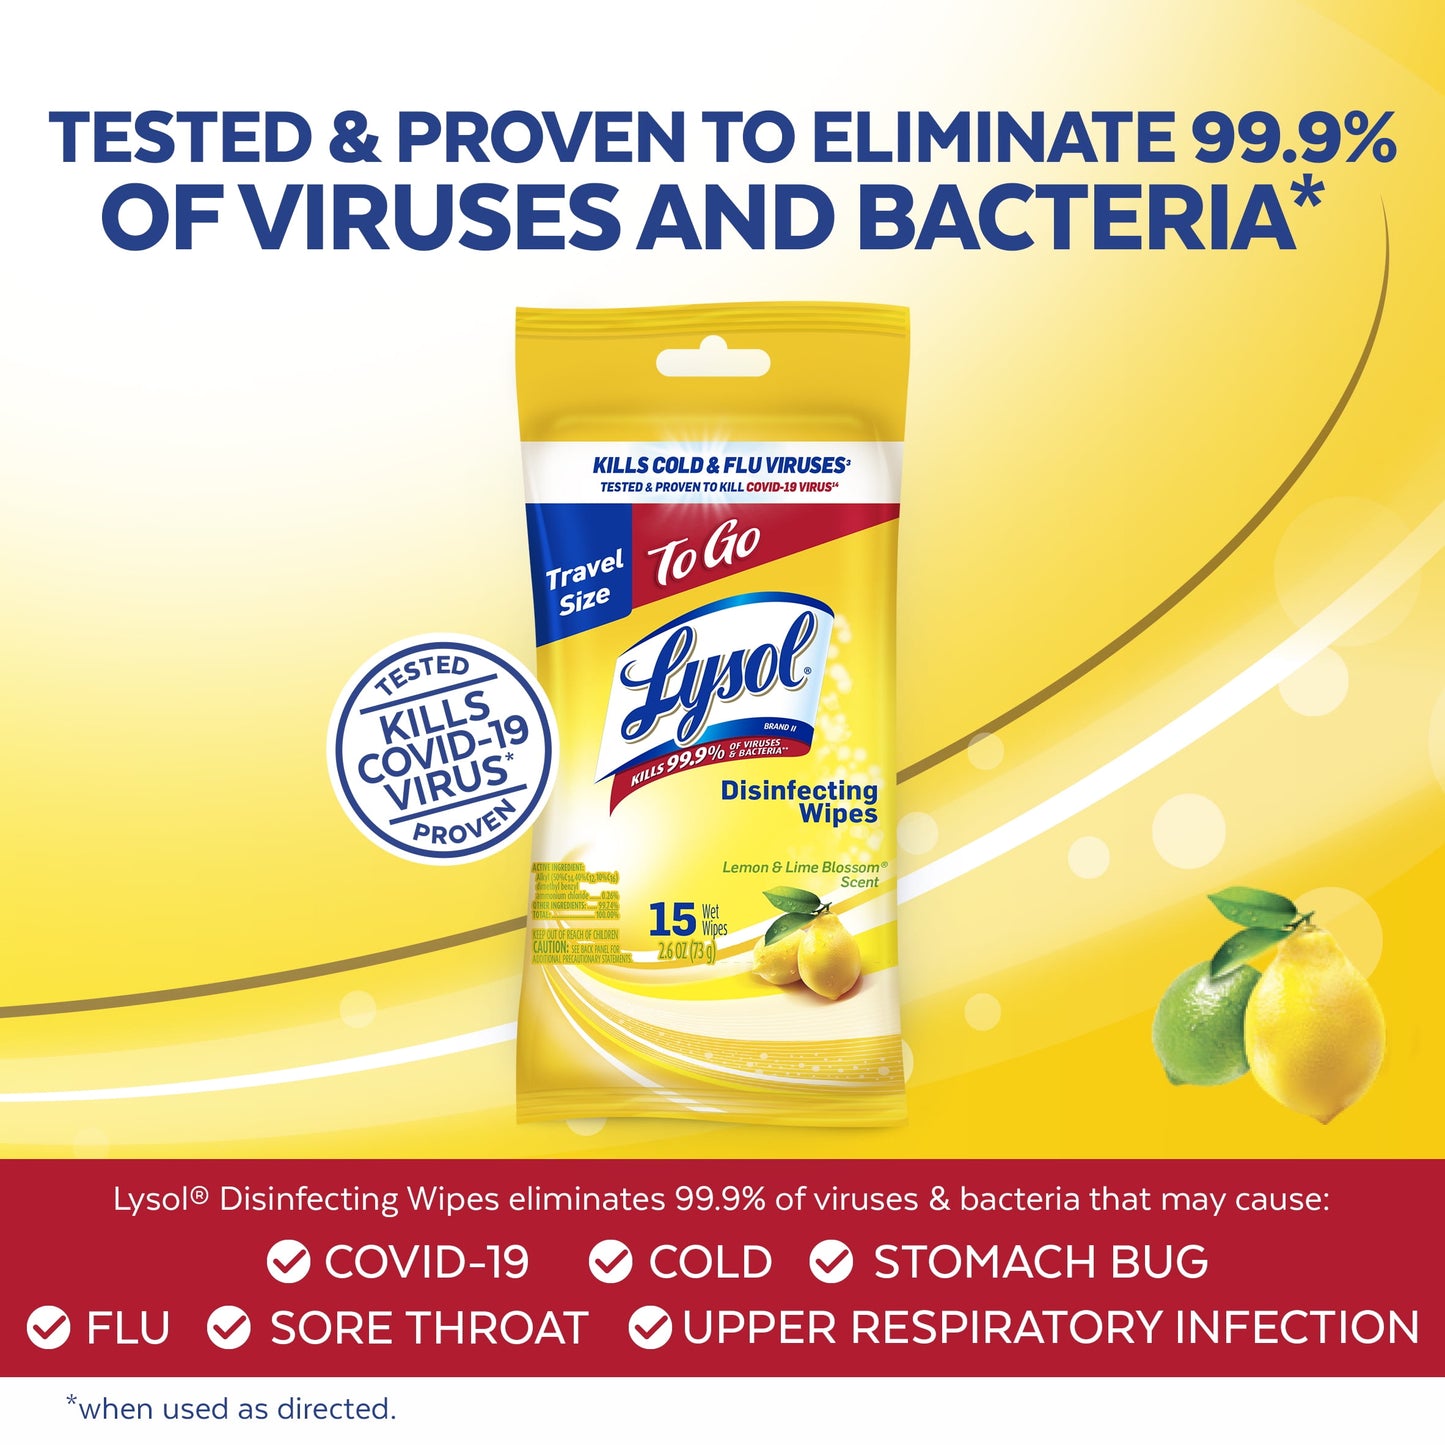 Lysol To Go Disinfectant Wipes, Travel Size Multi-Surface Antibacterial Cleaning Wipes, For On the Go Disinfecting and Cleaning, Lemon and Lime Blossom, 15ct Count